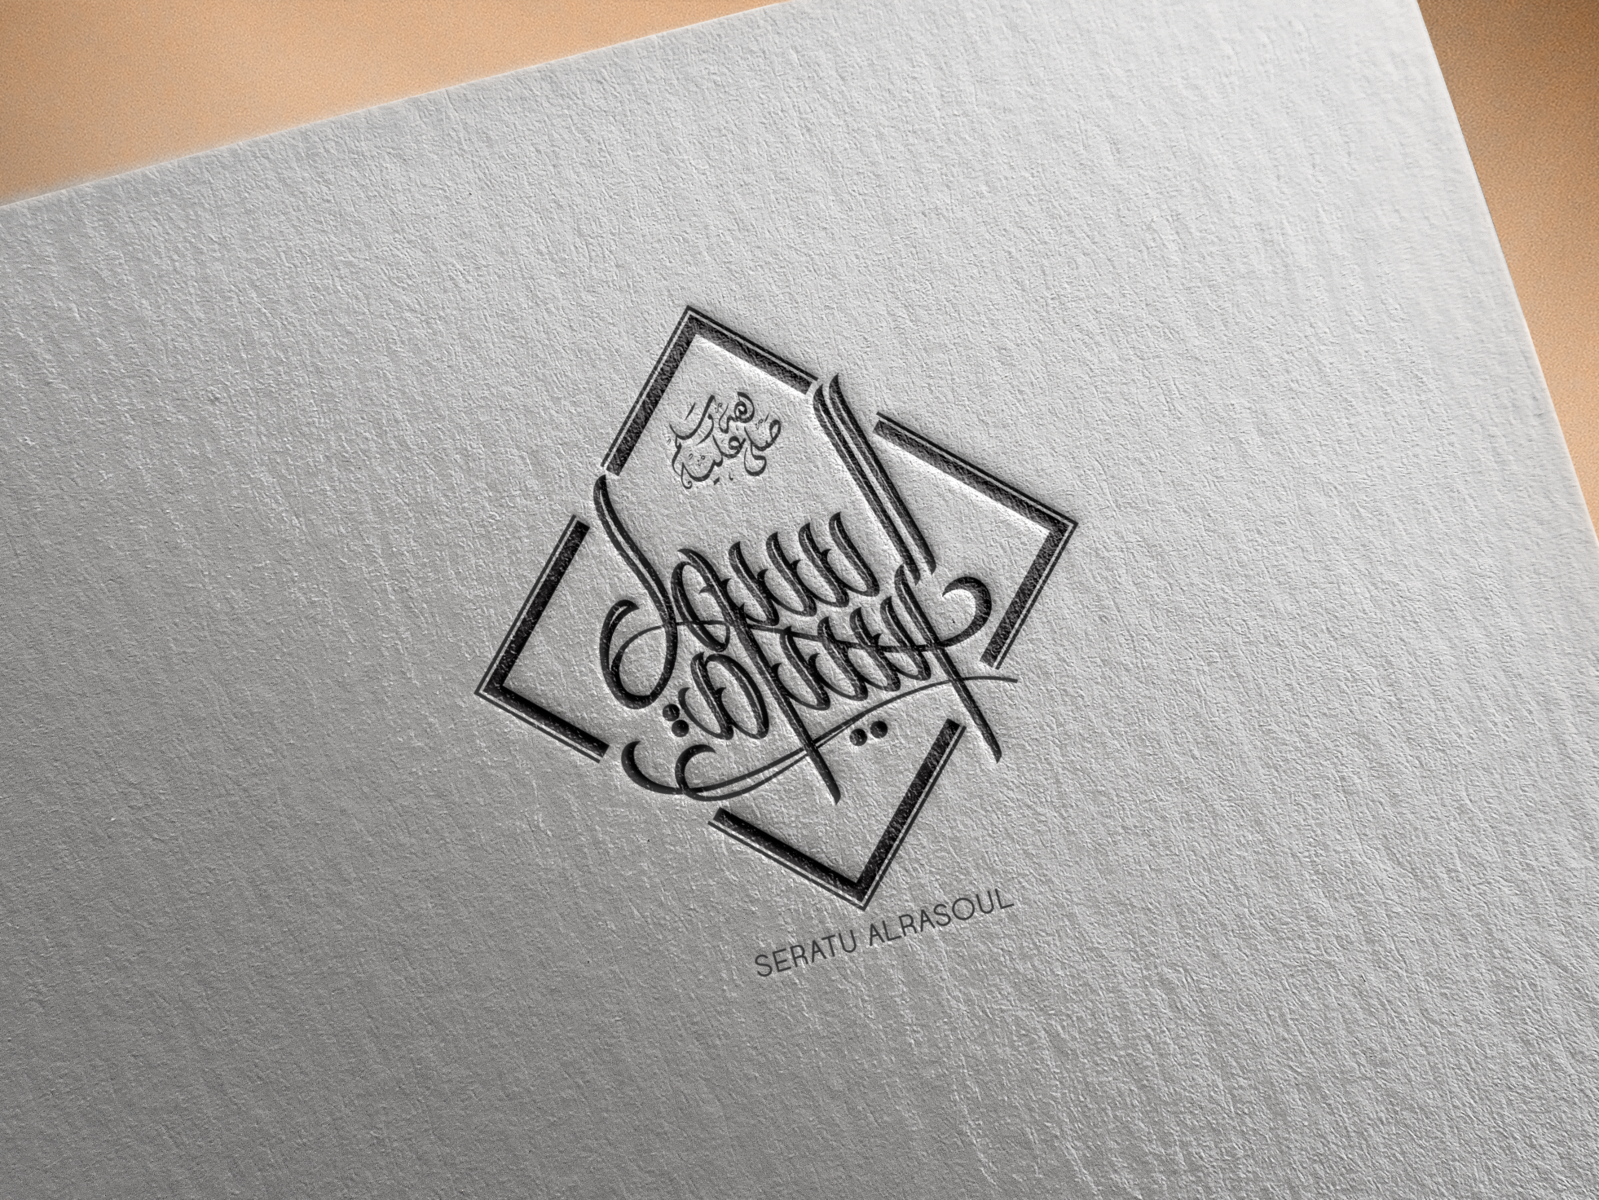 Download Free Logo Mockup Psd On Textured Paper by Ahmed Gaballa on ...